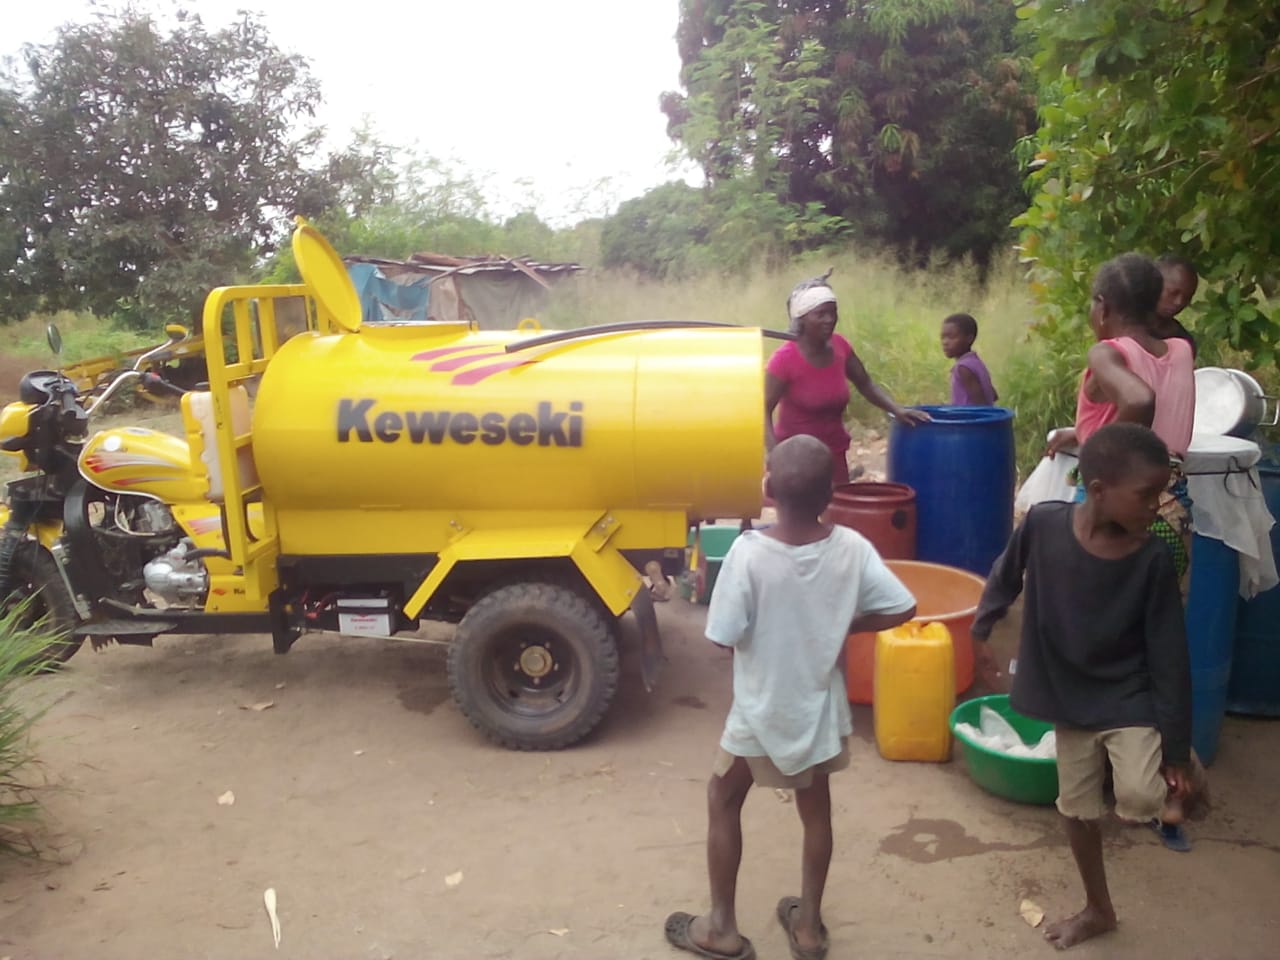 In Cuanza-Norte, the project's health activists have been mobilizing communities about Covid-19 and helping distribute water to families in Cazanga